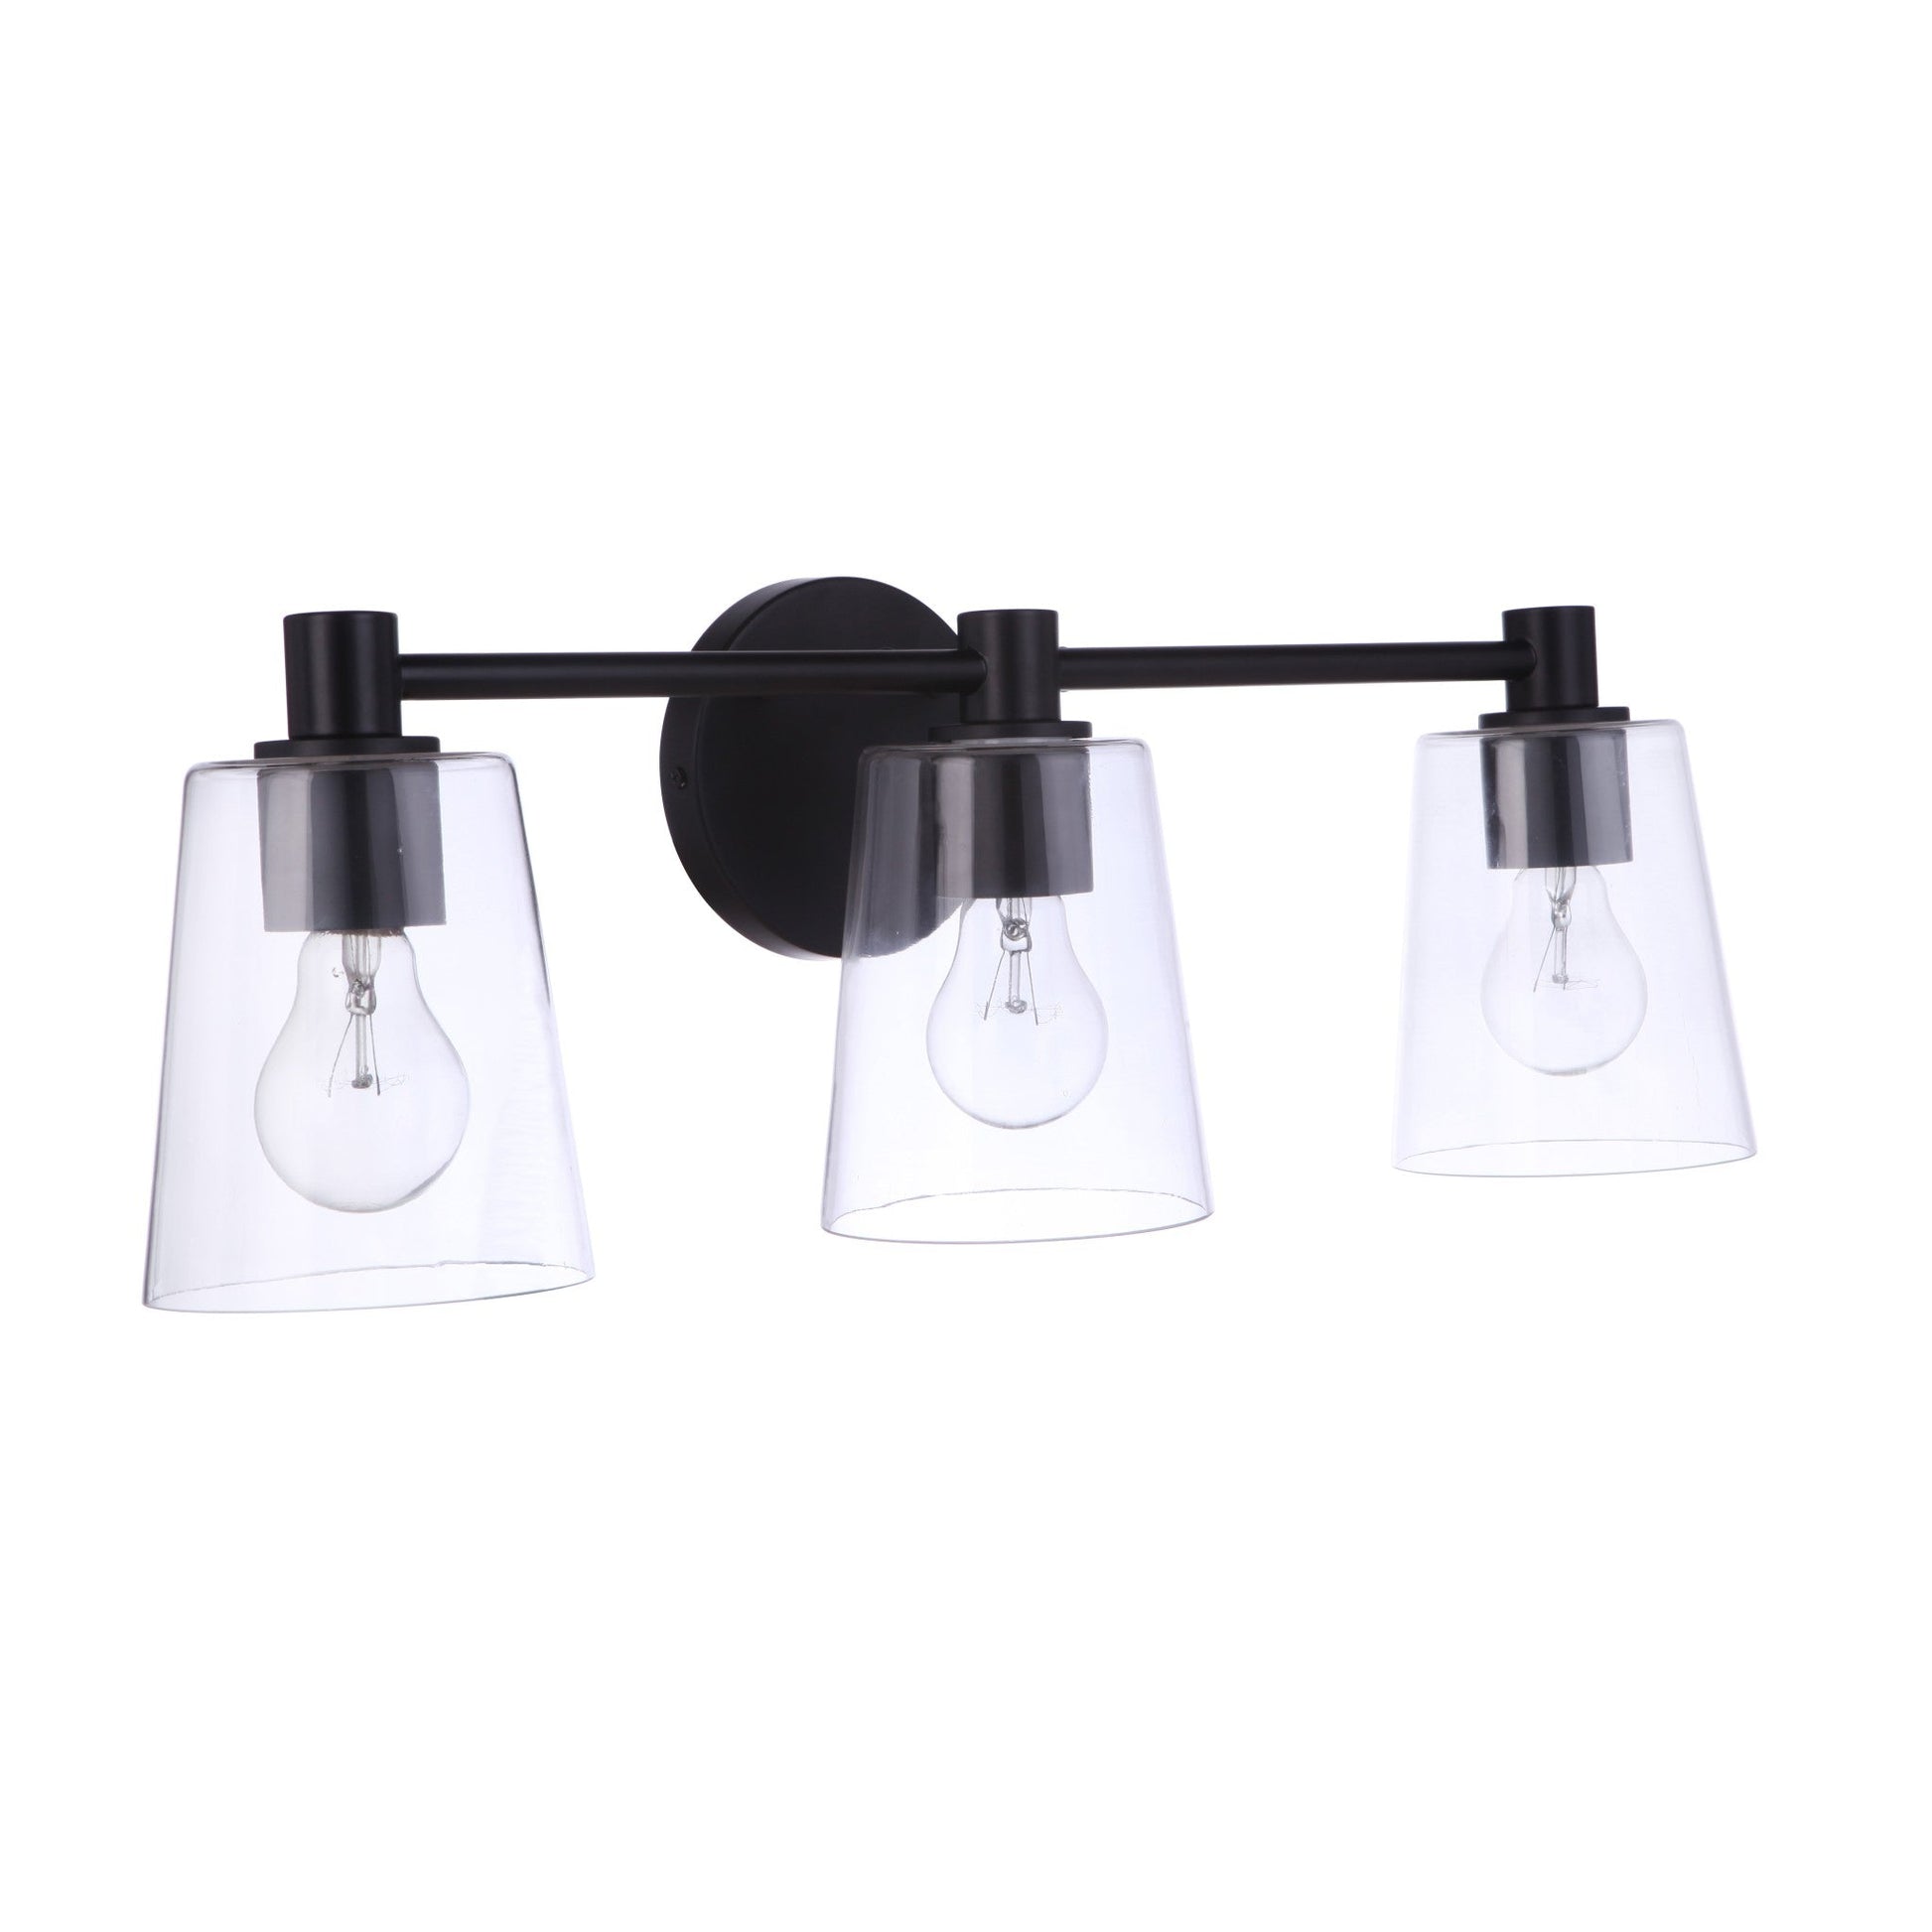 Craftmade Emilio 23" 3-Light Flat Black Vanity Light With Clear Glass Shades